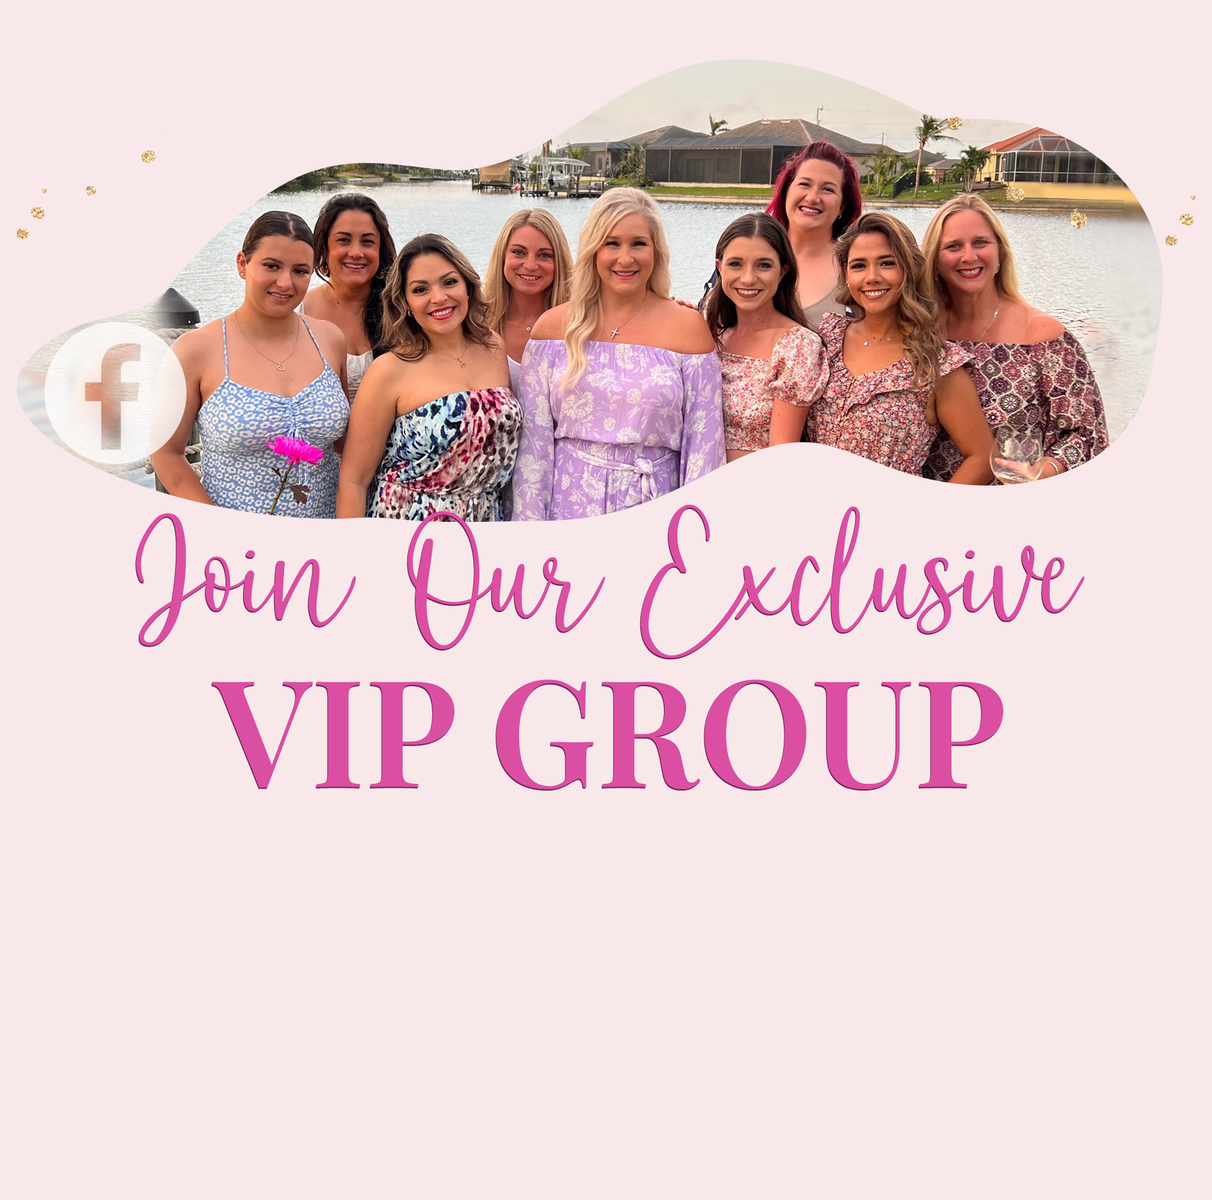 Join our exclusive VIP group